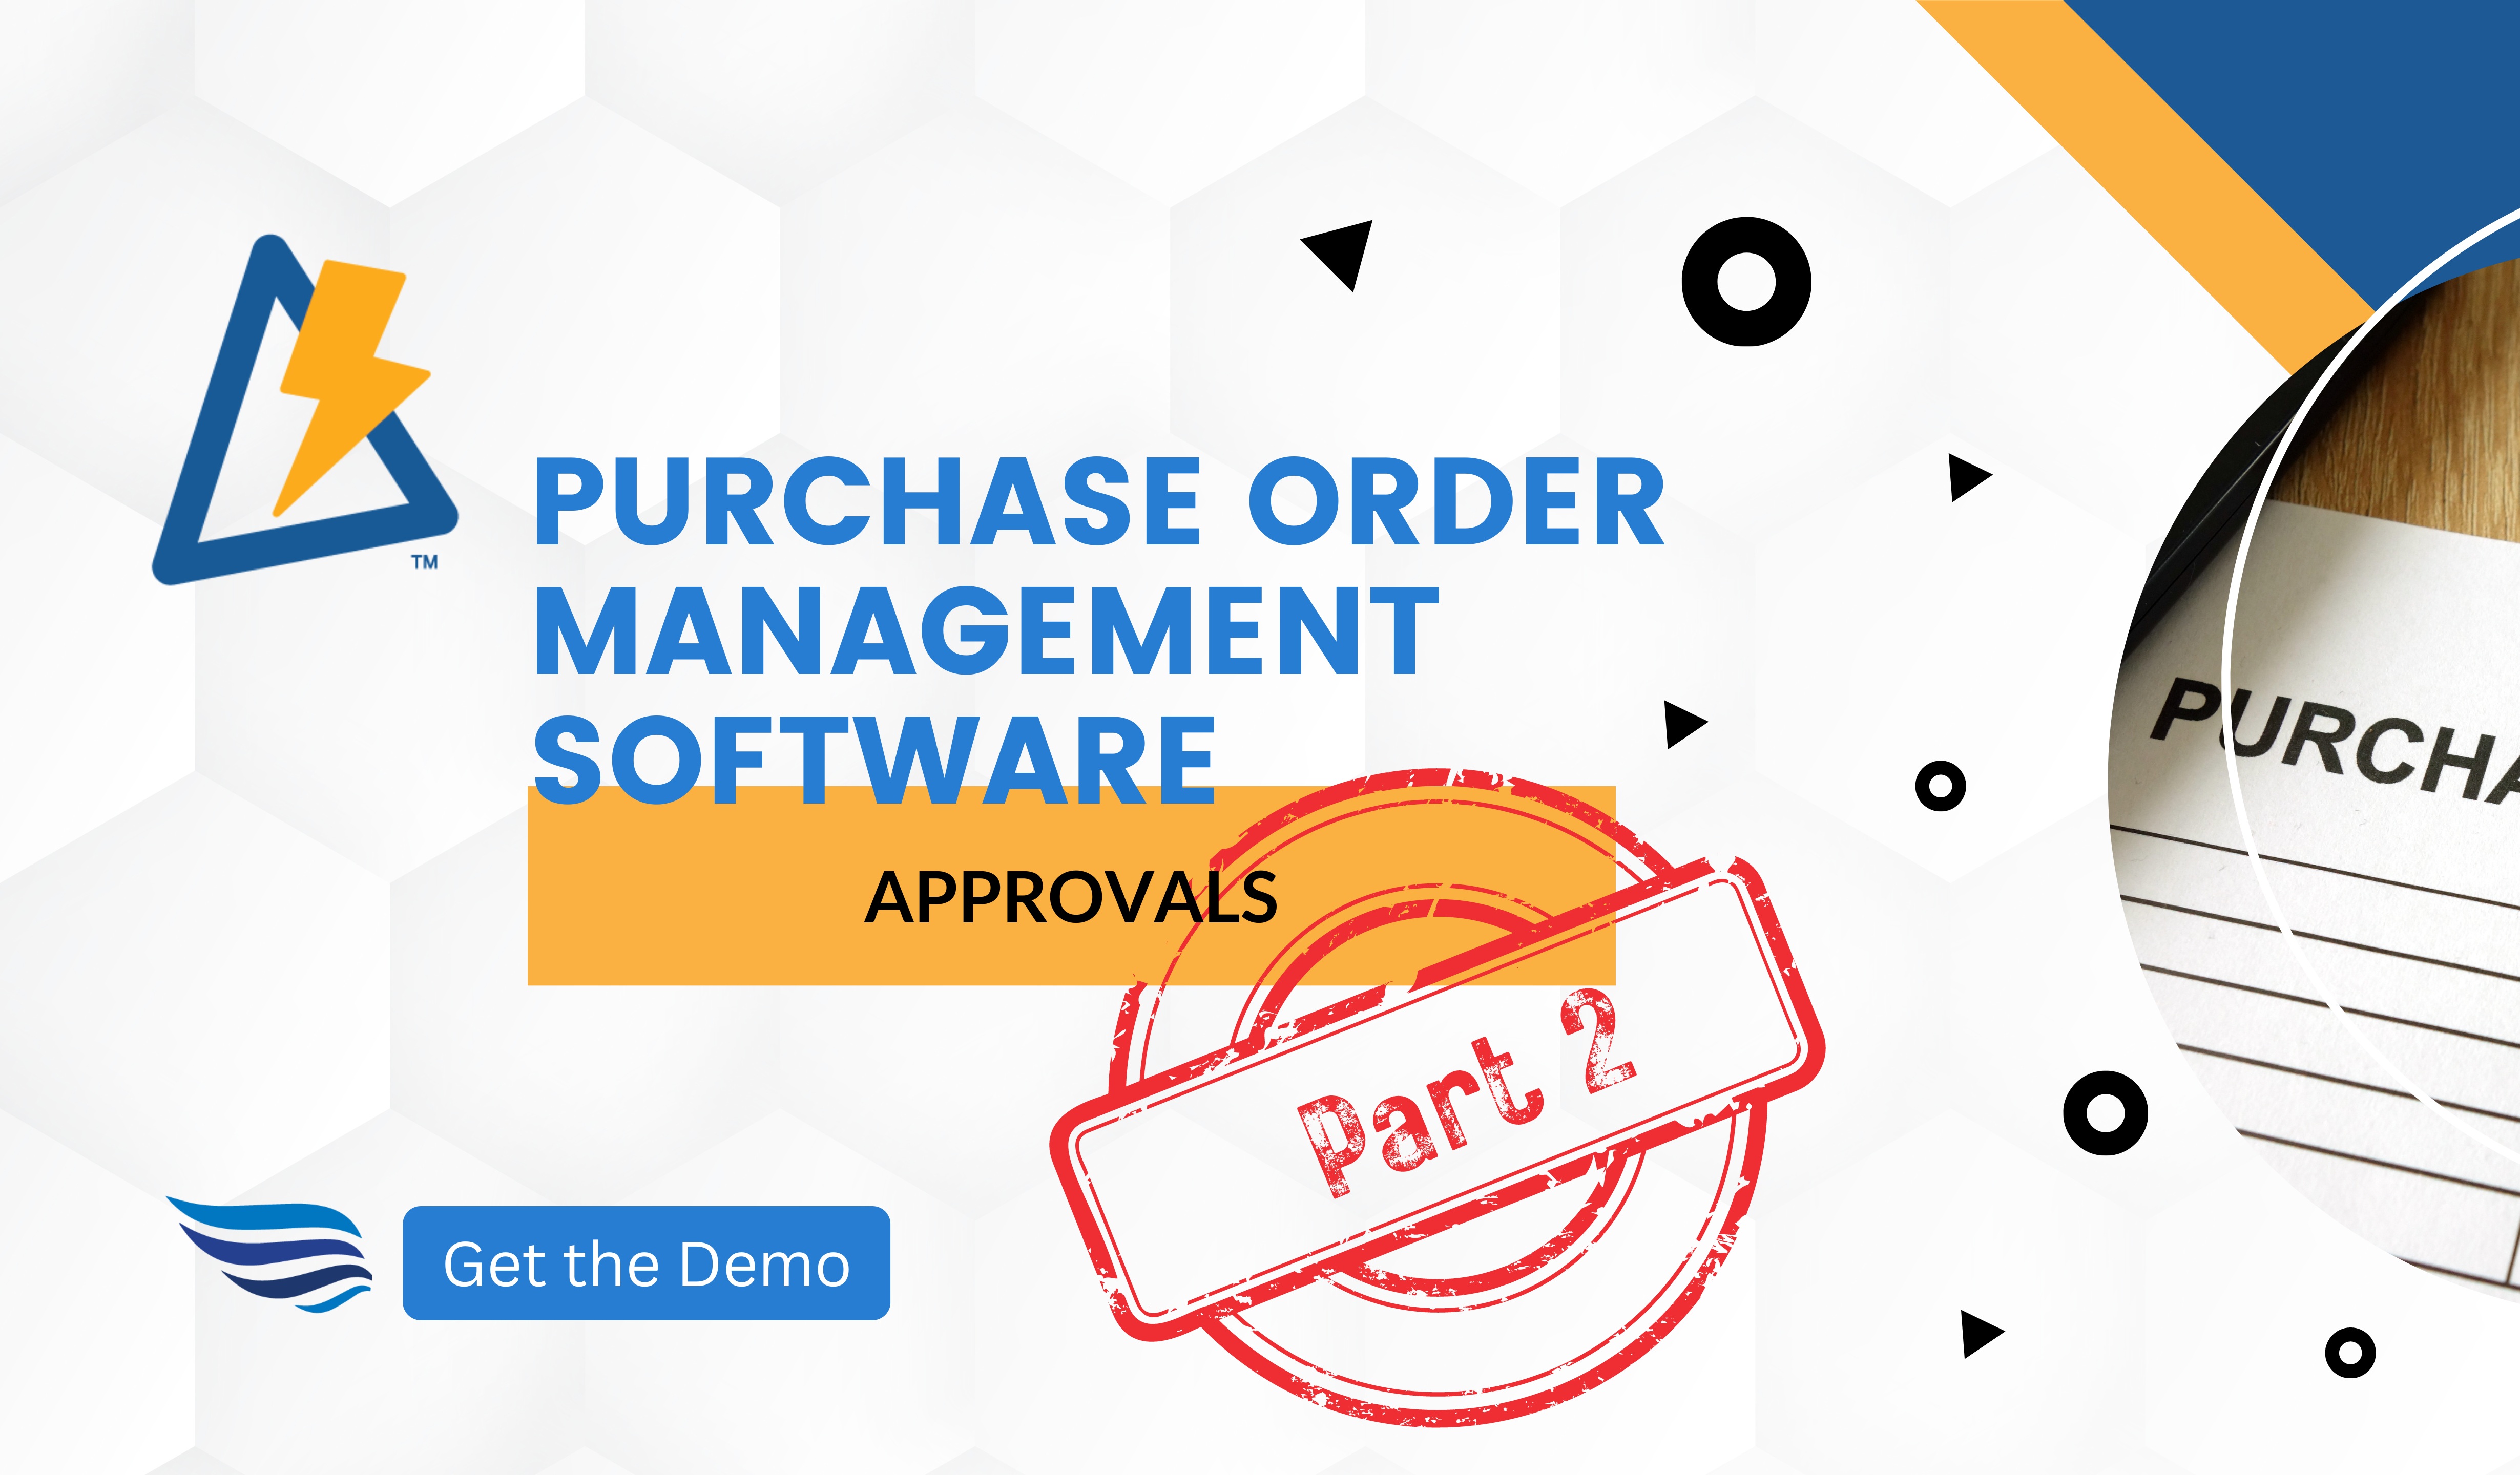 Part 2 of NITRO’s Purchase Order Management System; Approvals